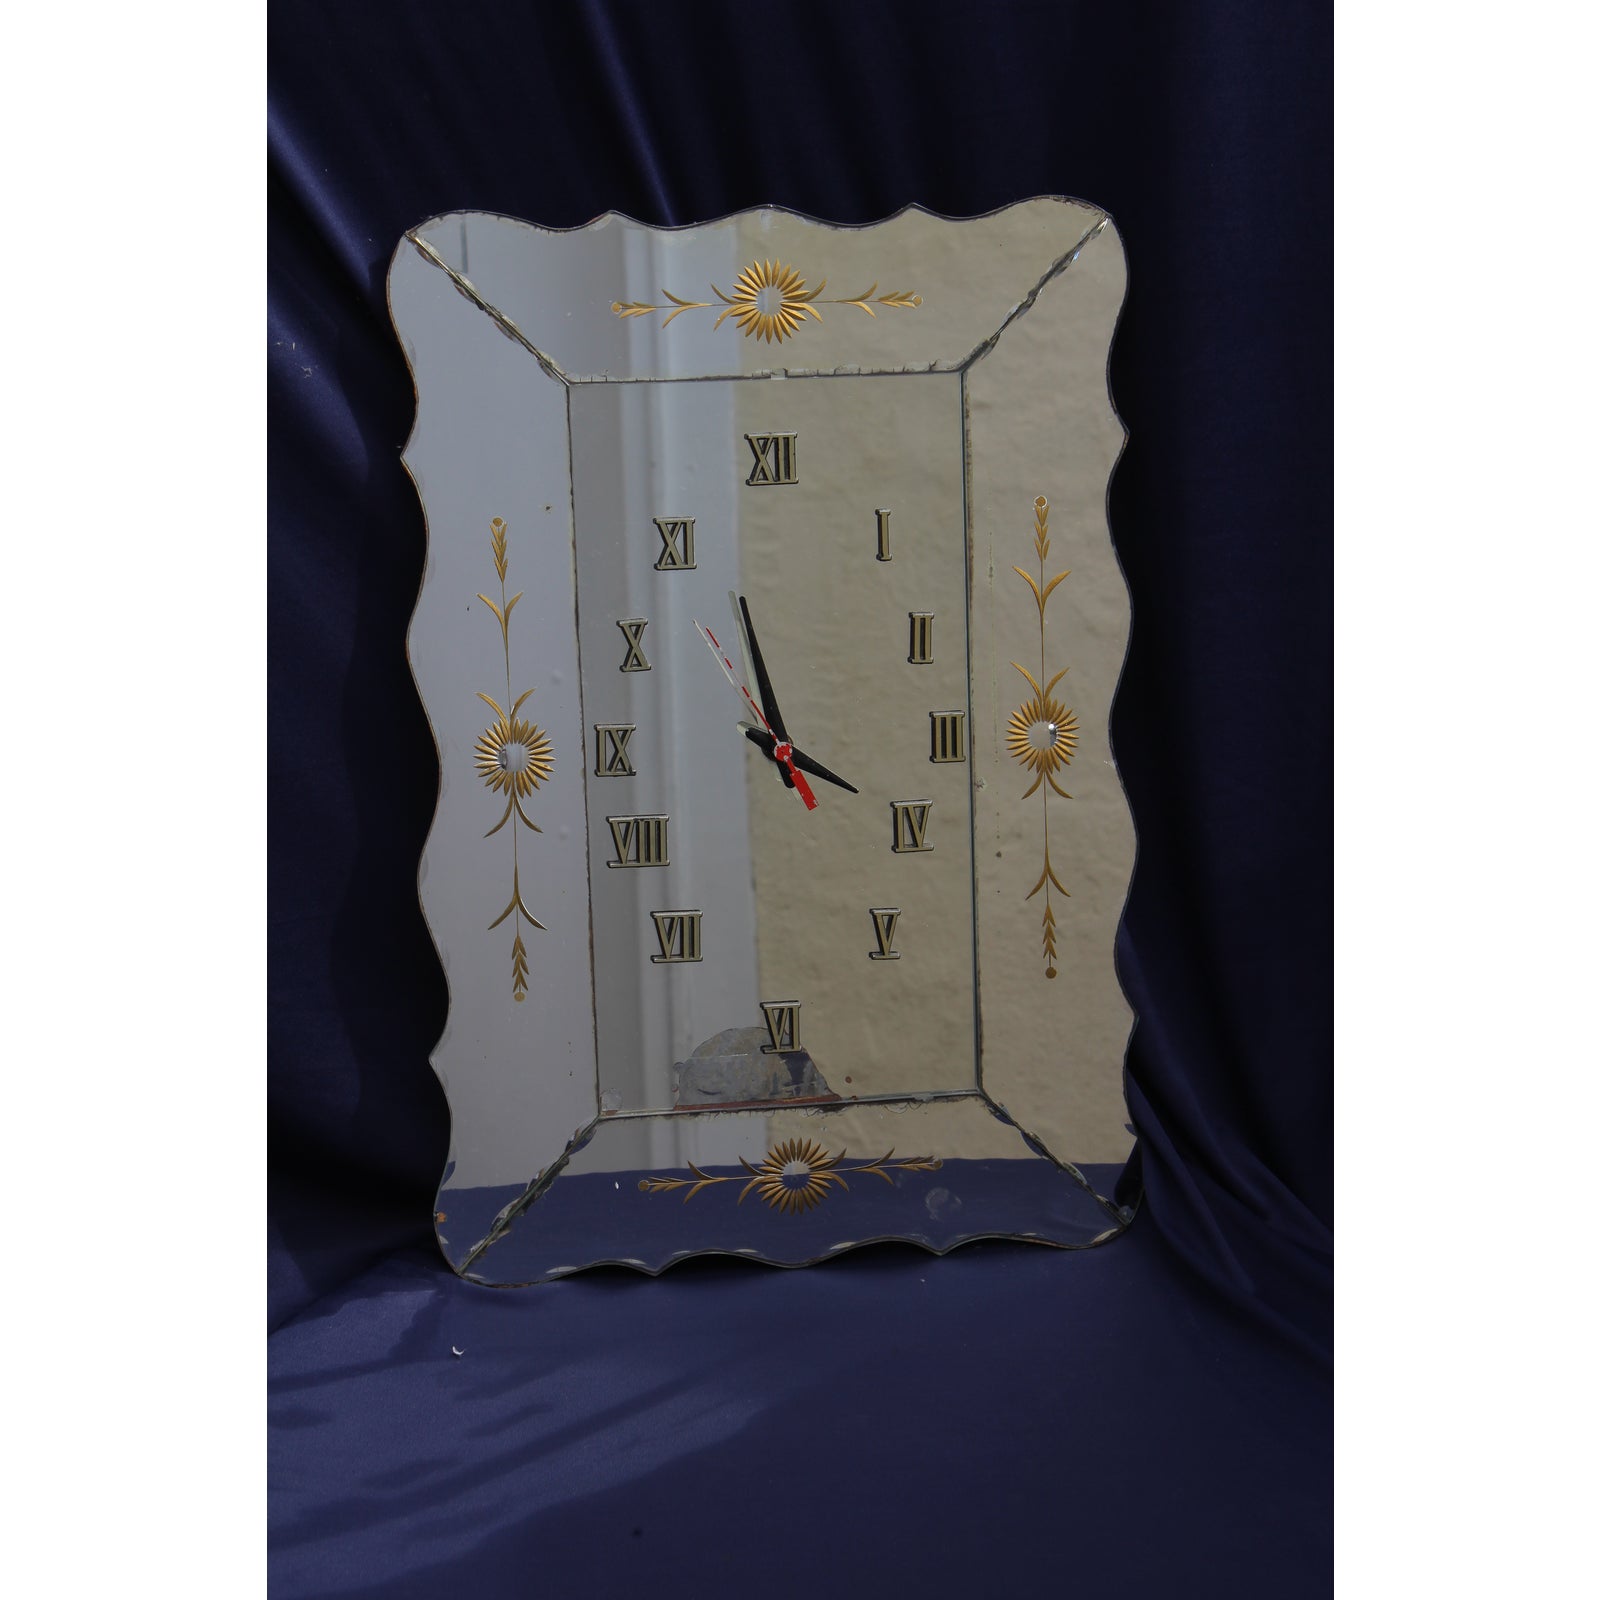 mid-20th-c-italian-or-american-hollywood-regency-mirrored-glass-and-guiled-wall-clock-0438